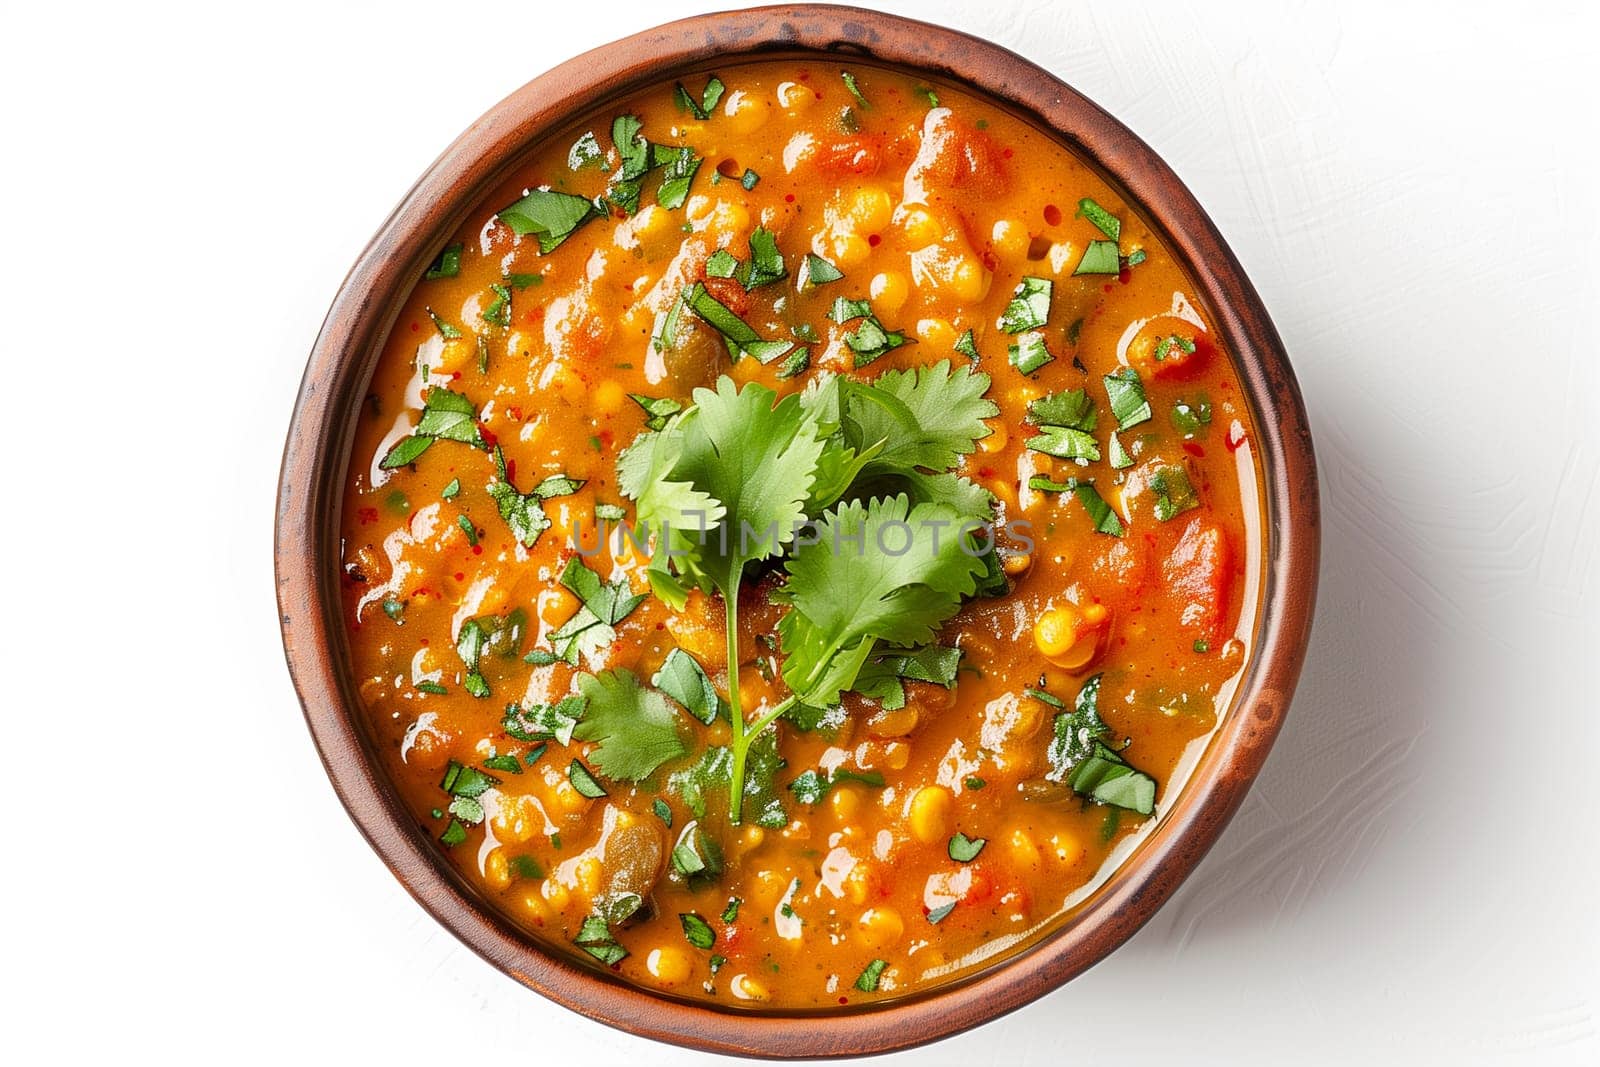 A bowl filled with spicy lentil dahl soup, topped with vibrant green cilantro leaves for a pop of flavor and color.